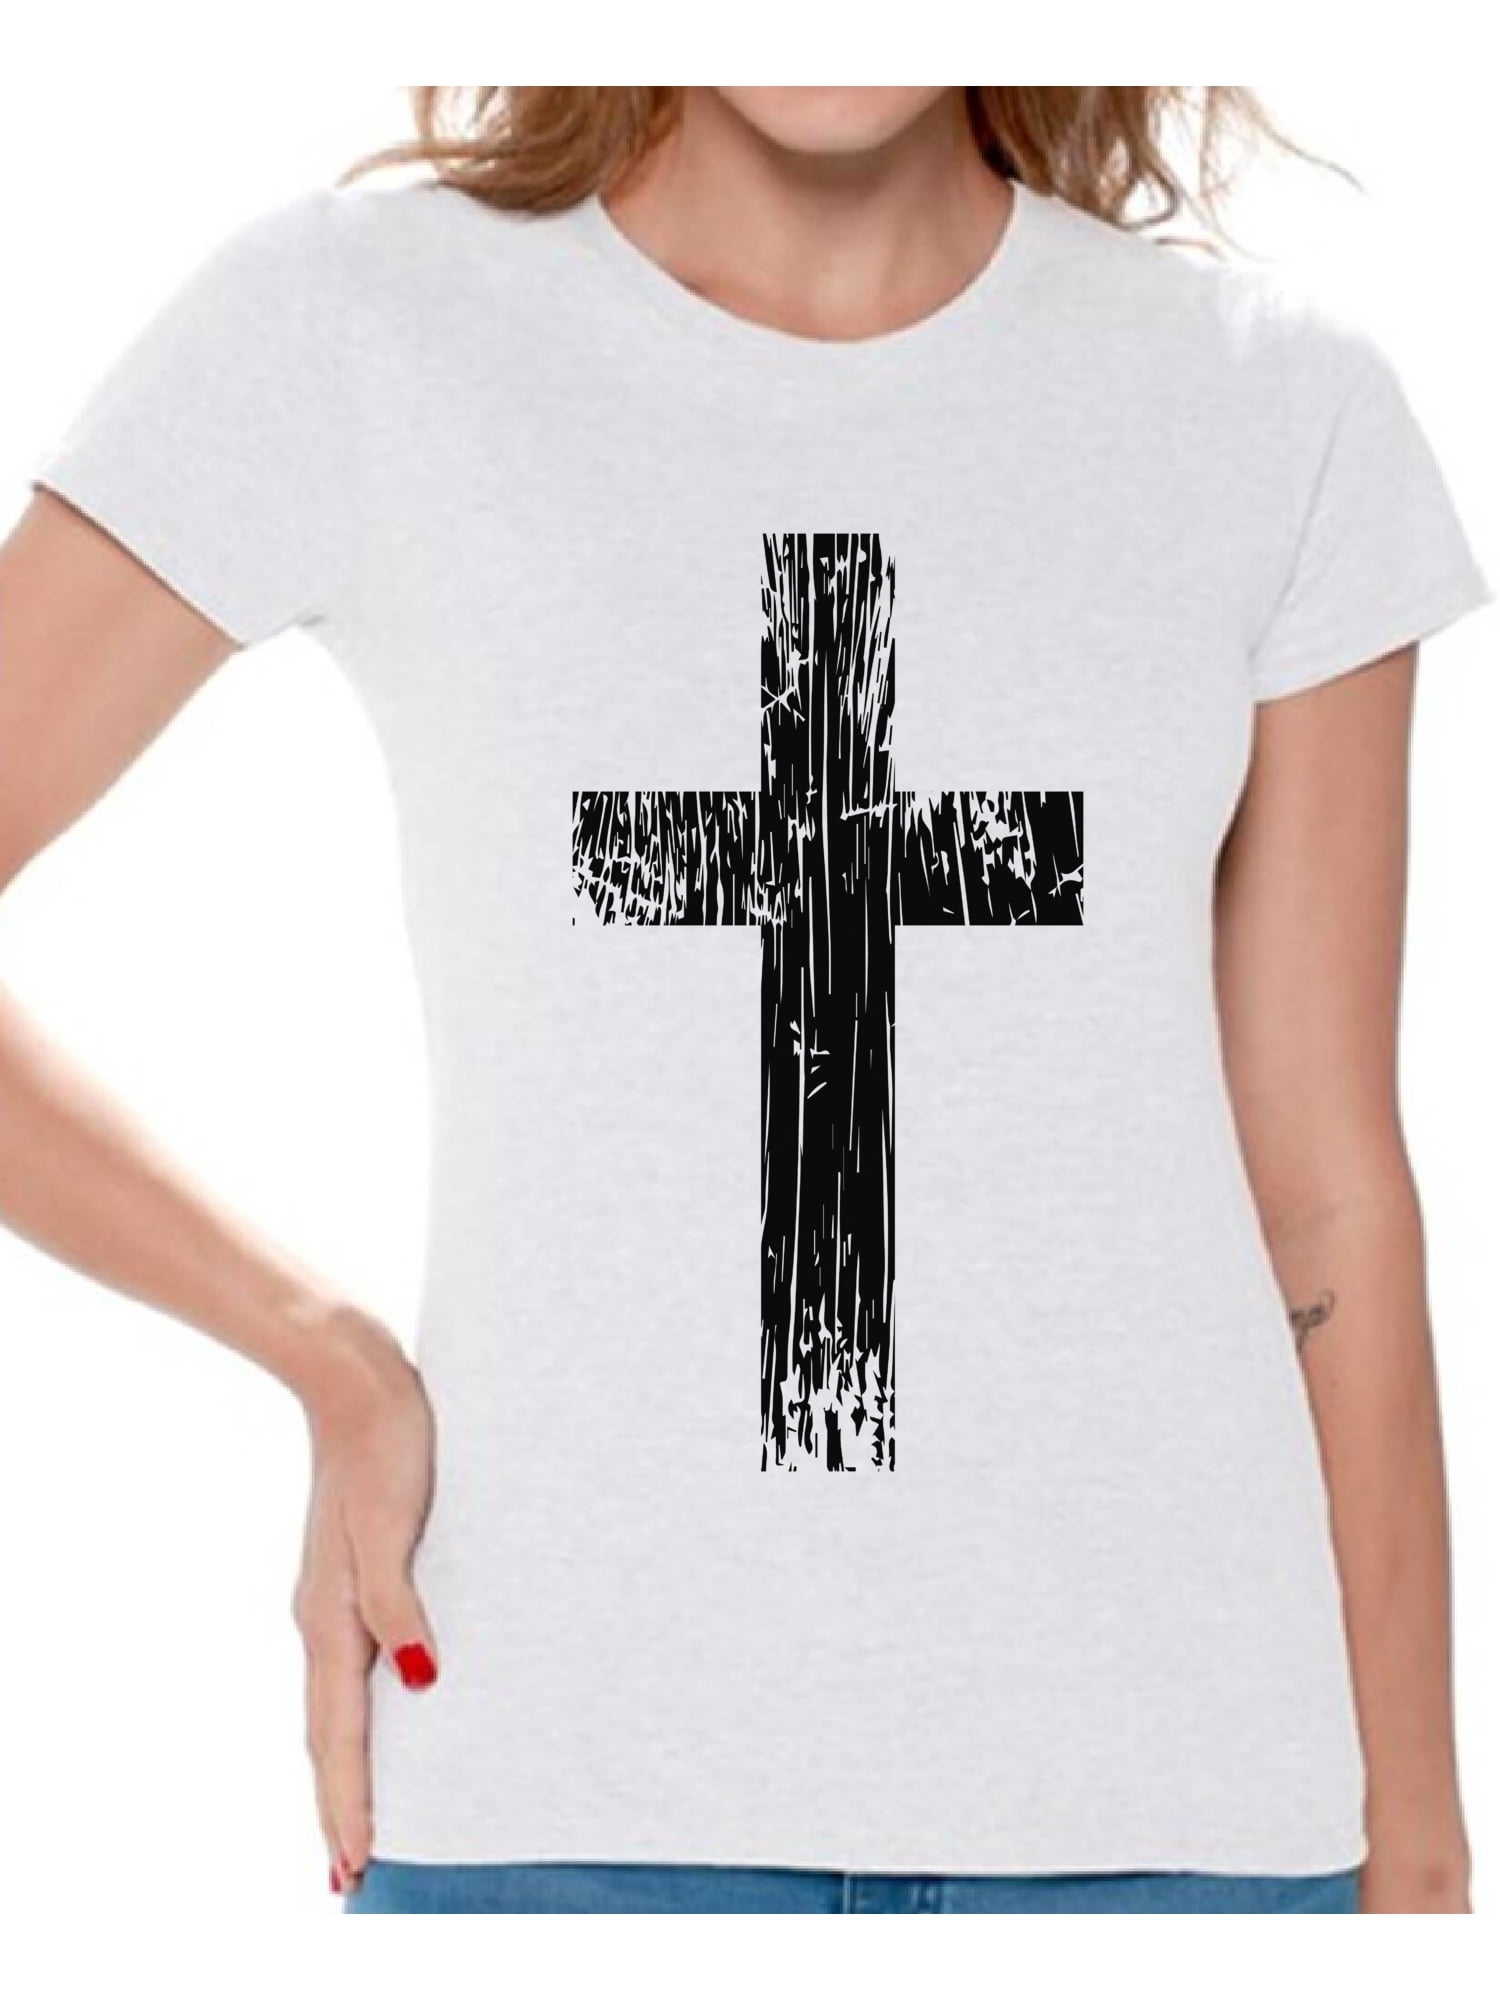 Awkward Styles Black Cross Shirt for Ladies Christian Cross Clothes for ...